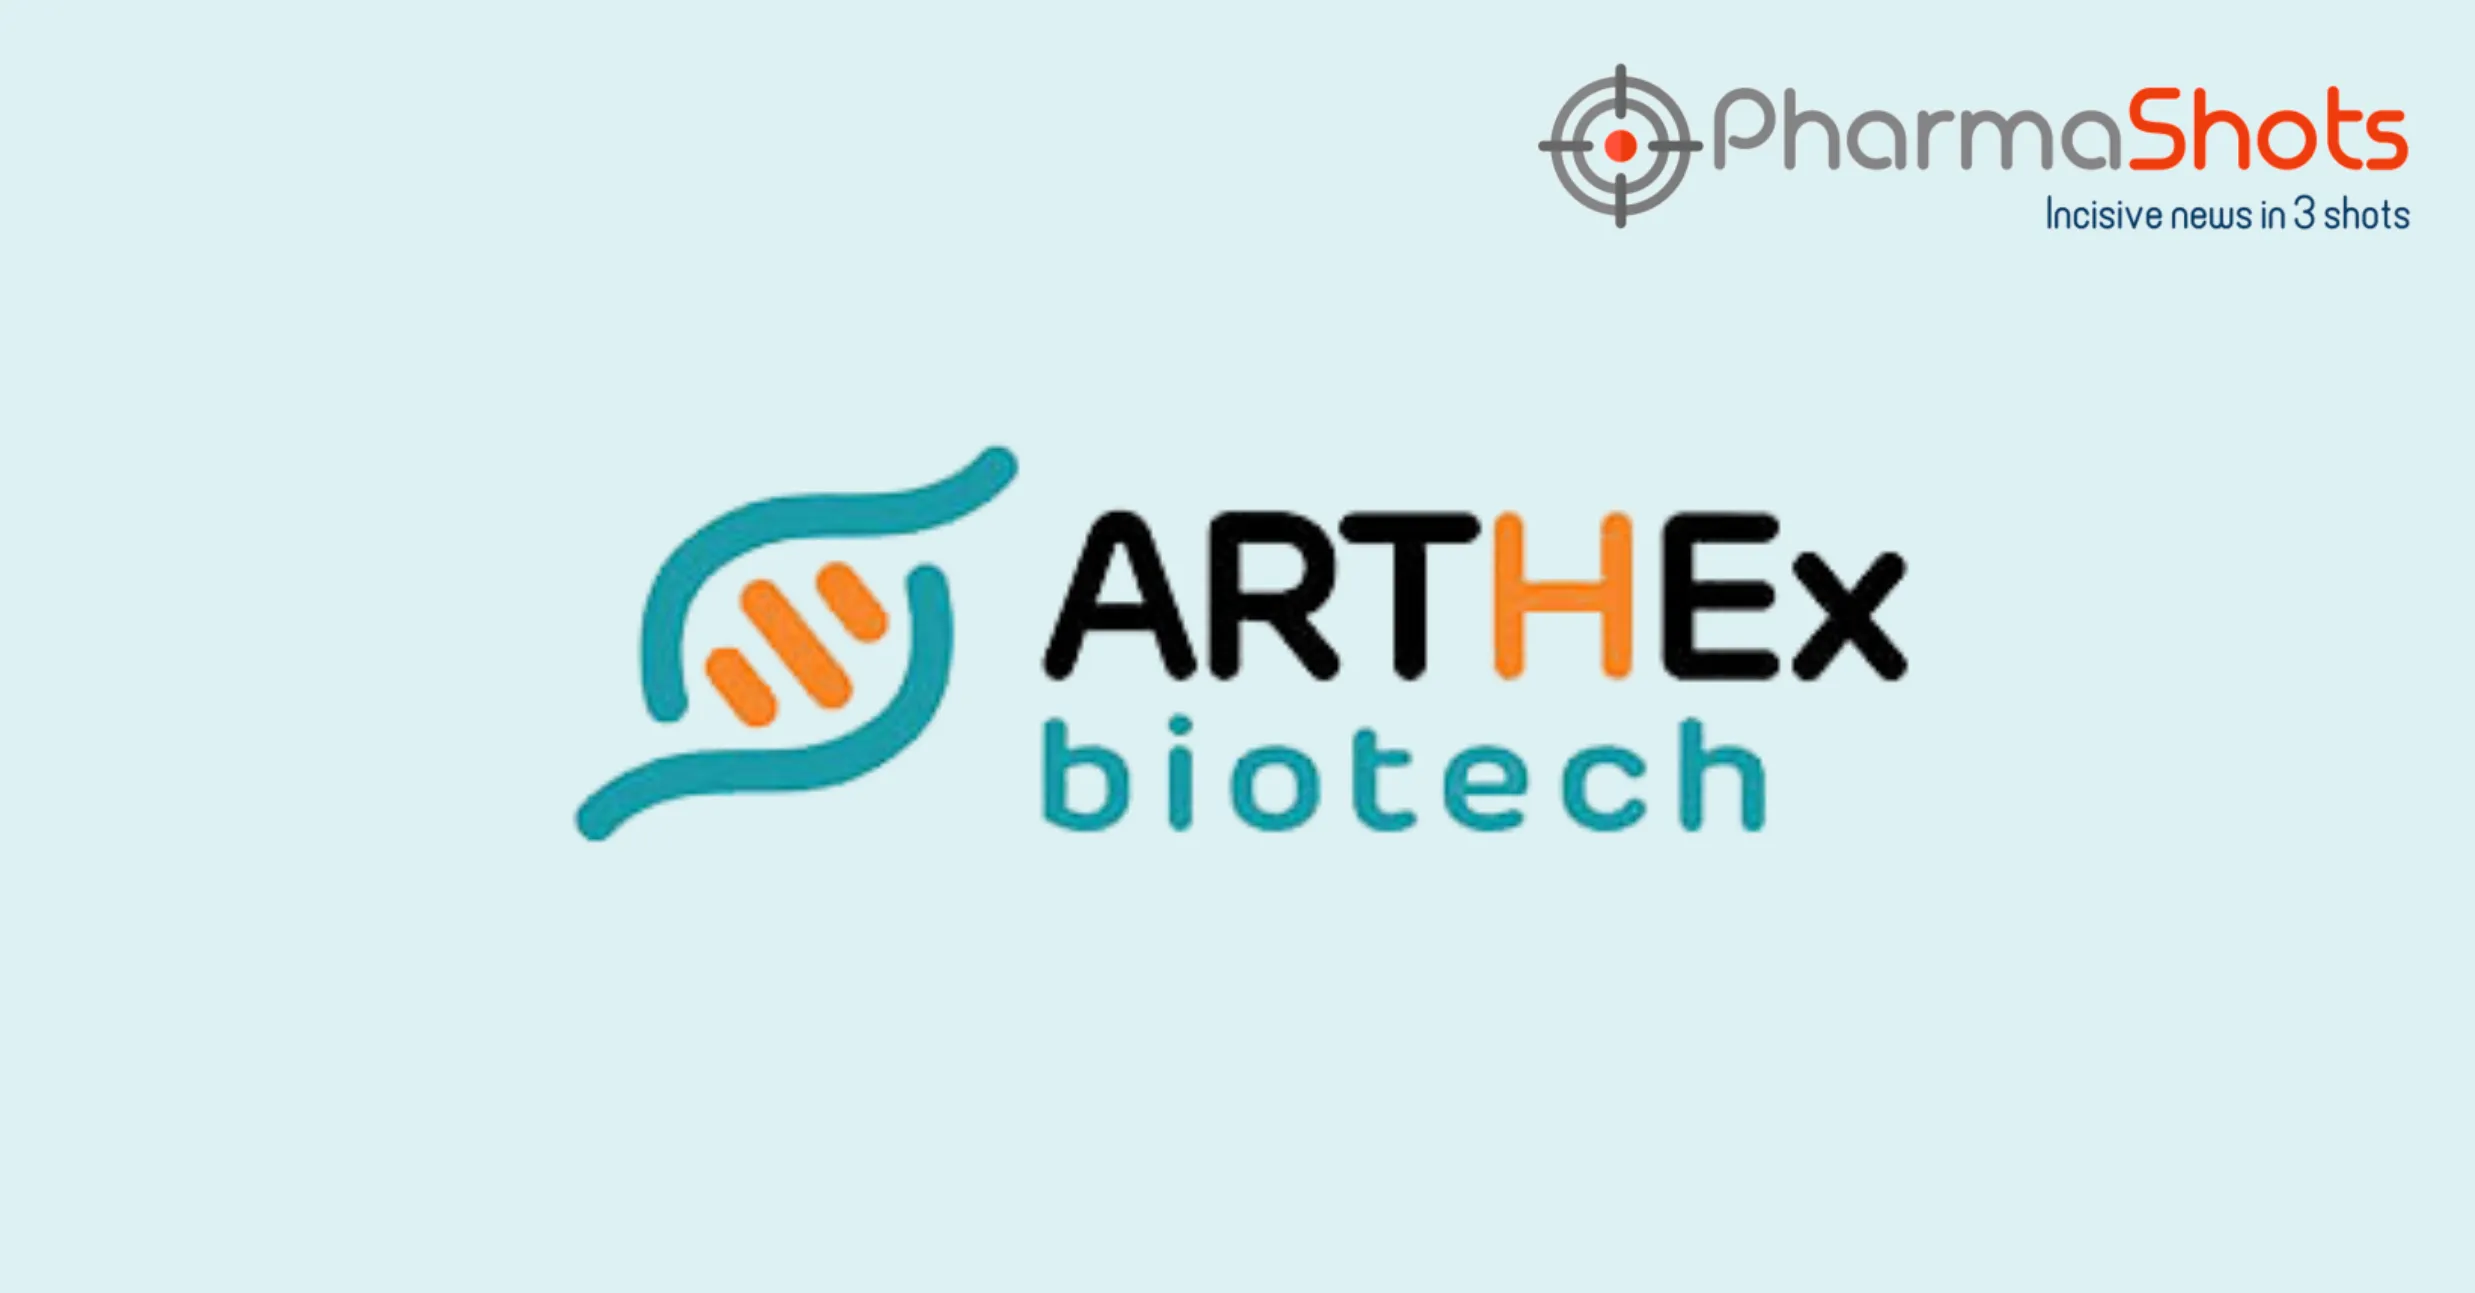 The US FDA Clears ARTHEx Biotech’s IND Application to Commence the P-I-IIa (ArthemiR) Study of ATX-01 for Myotonic Dystrophy Type 1 (DM1)